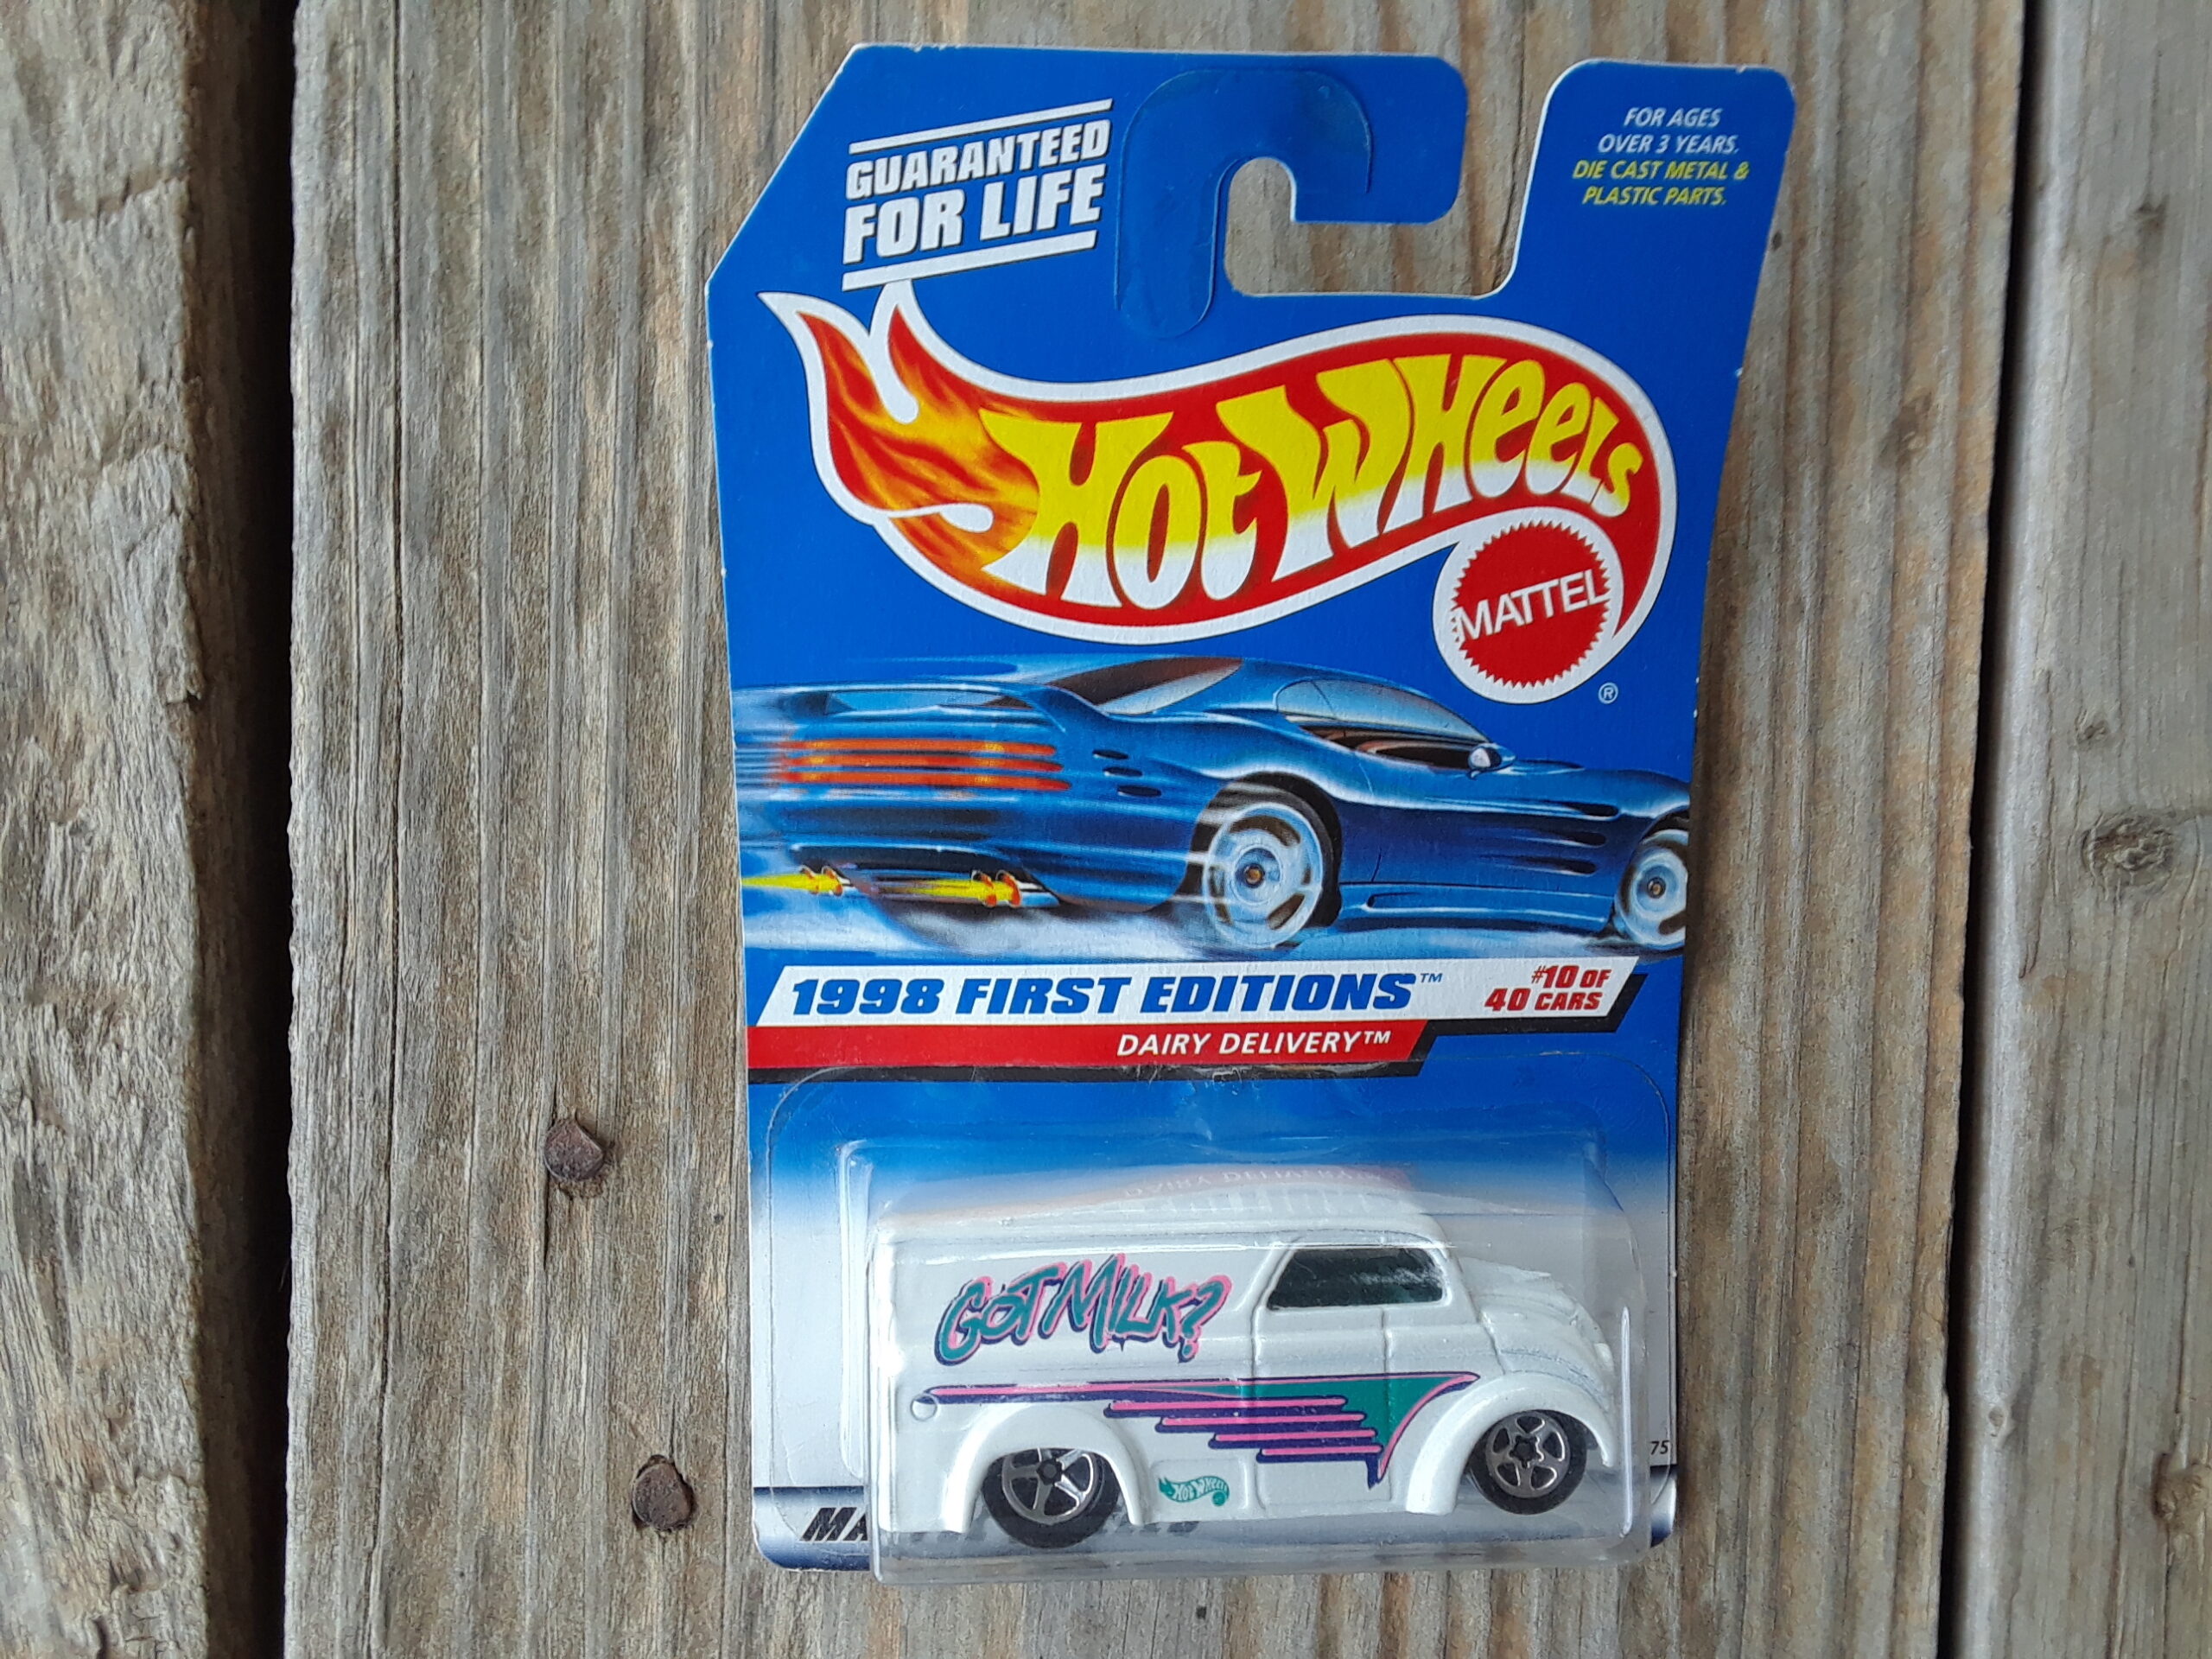 Hot Wheels 1998 First Editions Dairy Delivery